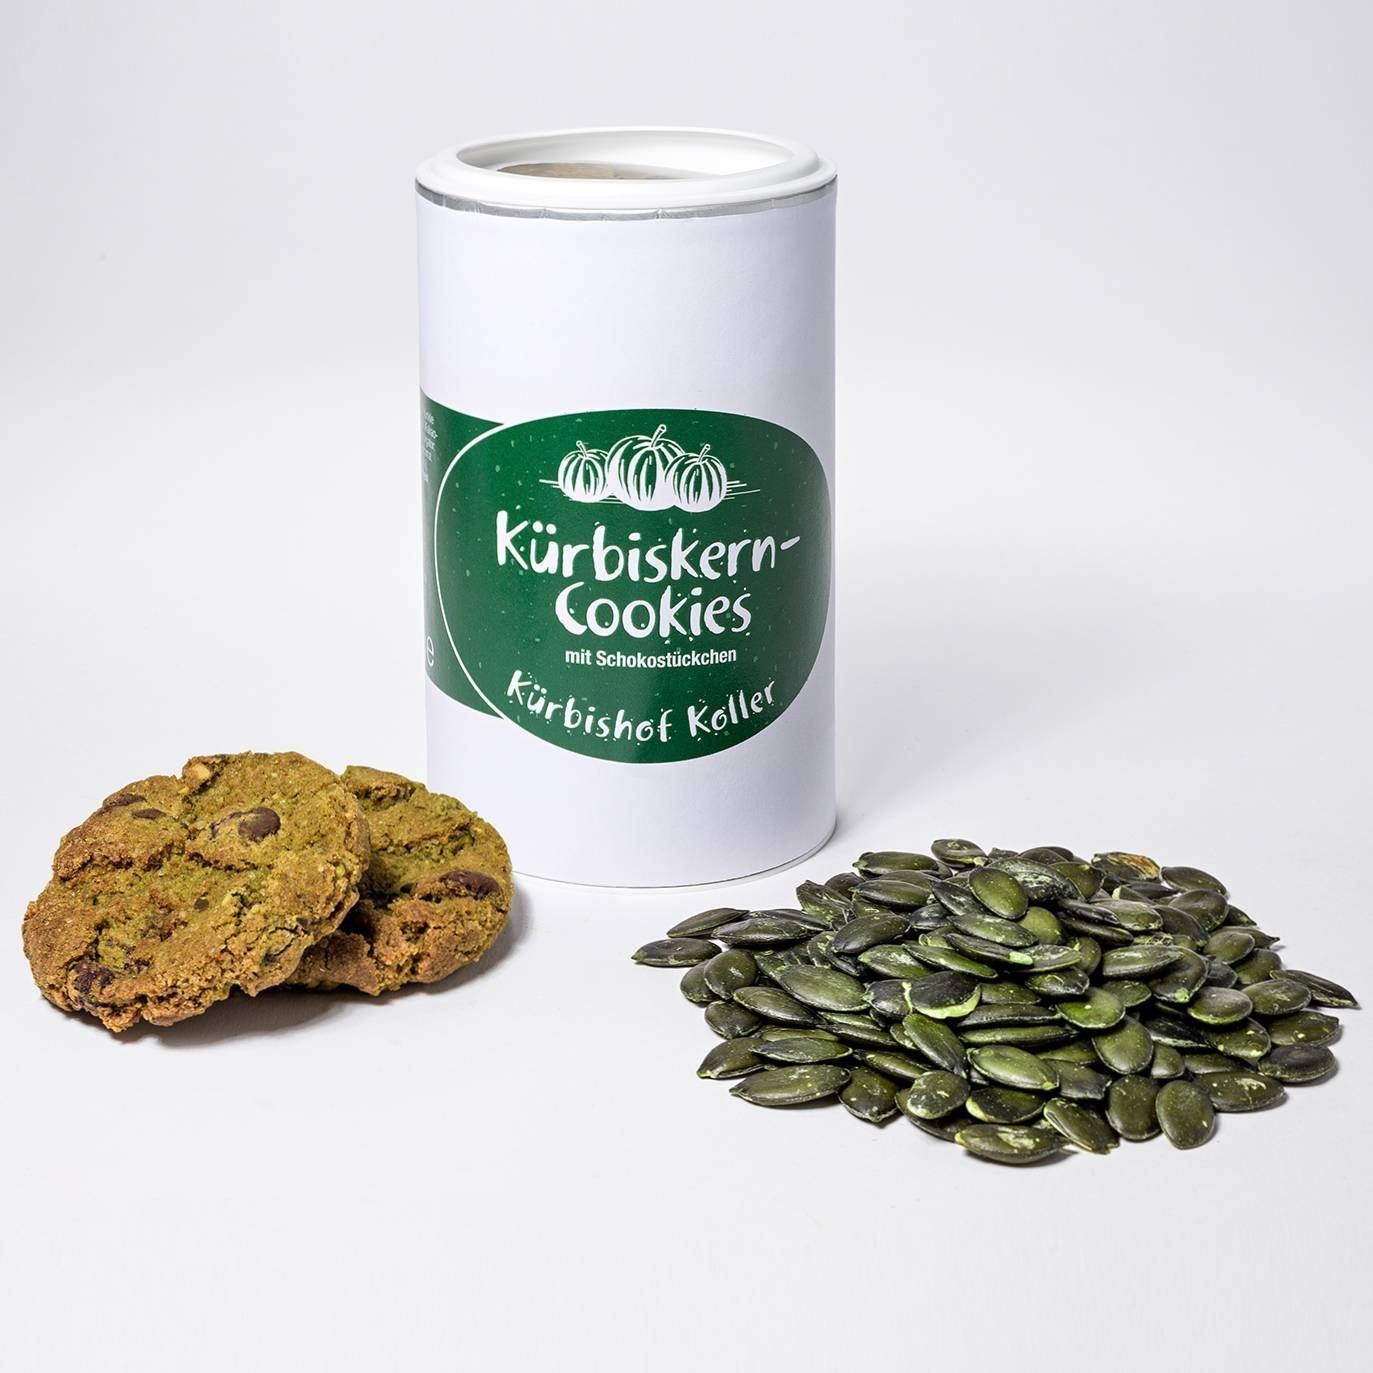 Pumpkin Seed Cookies with Chocolate Chips in Malaysia